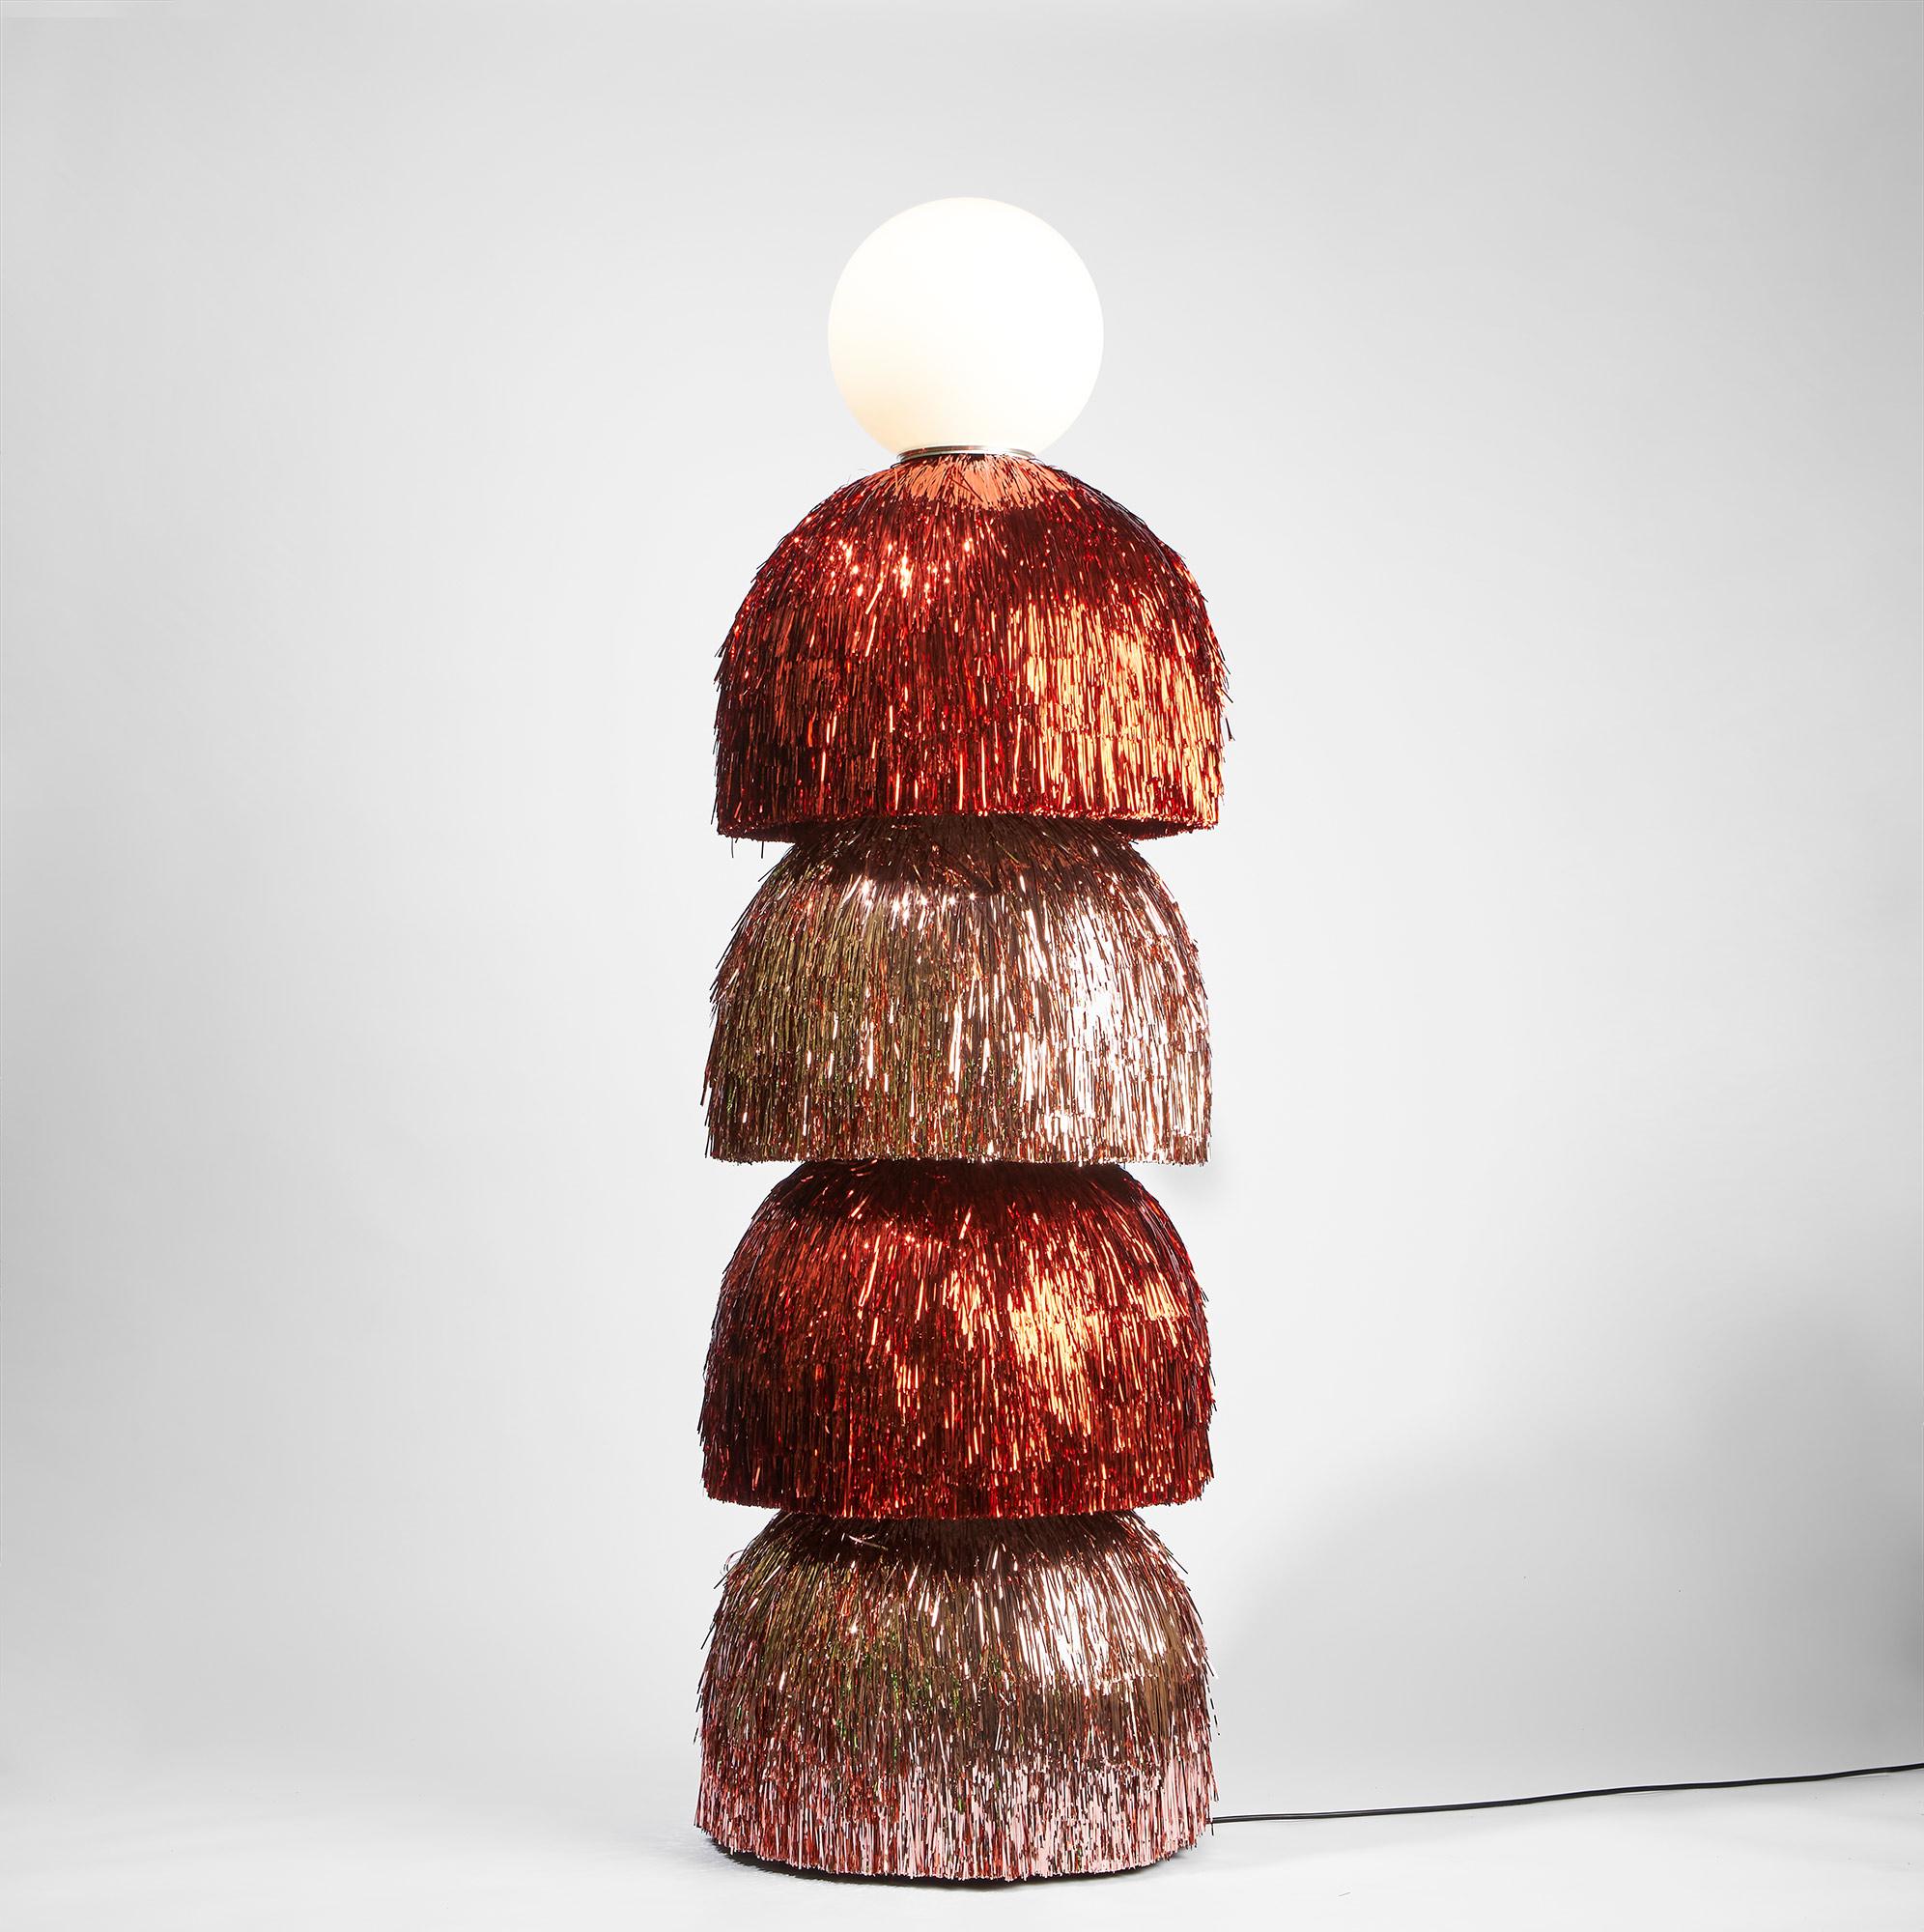 Baile collection investigates traditional festive costumes to create an collection of lamps, that exalt joy and the encounter through colors and shine of its bodies.